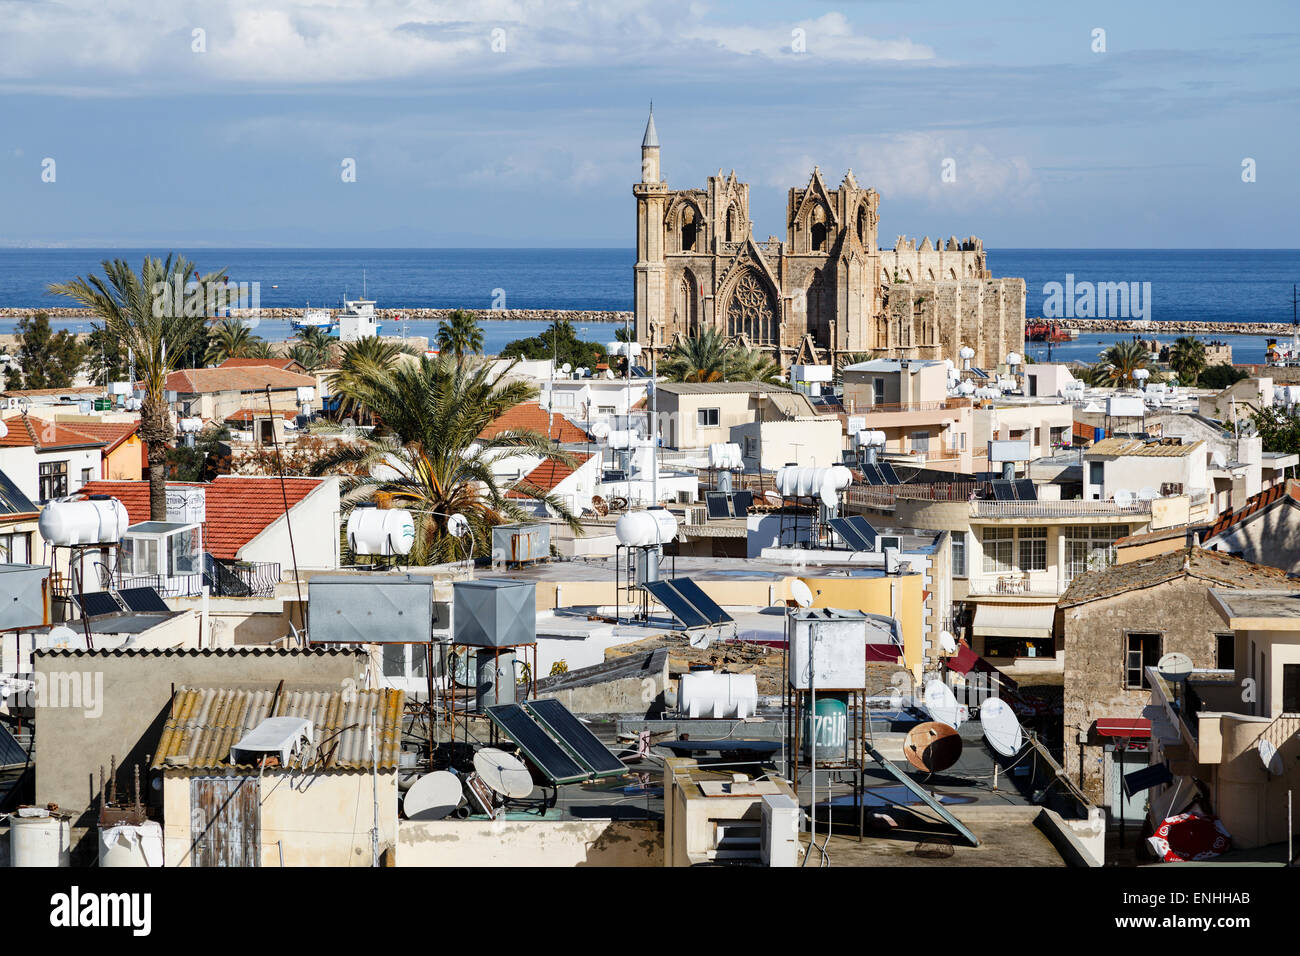 View from the city walls across the rooftops to the Lala Mustafa Pasha Mosque, Gazimagusa (Famagusta), Northern Cyprus Stock Photo